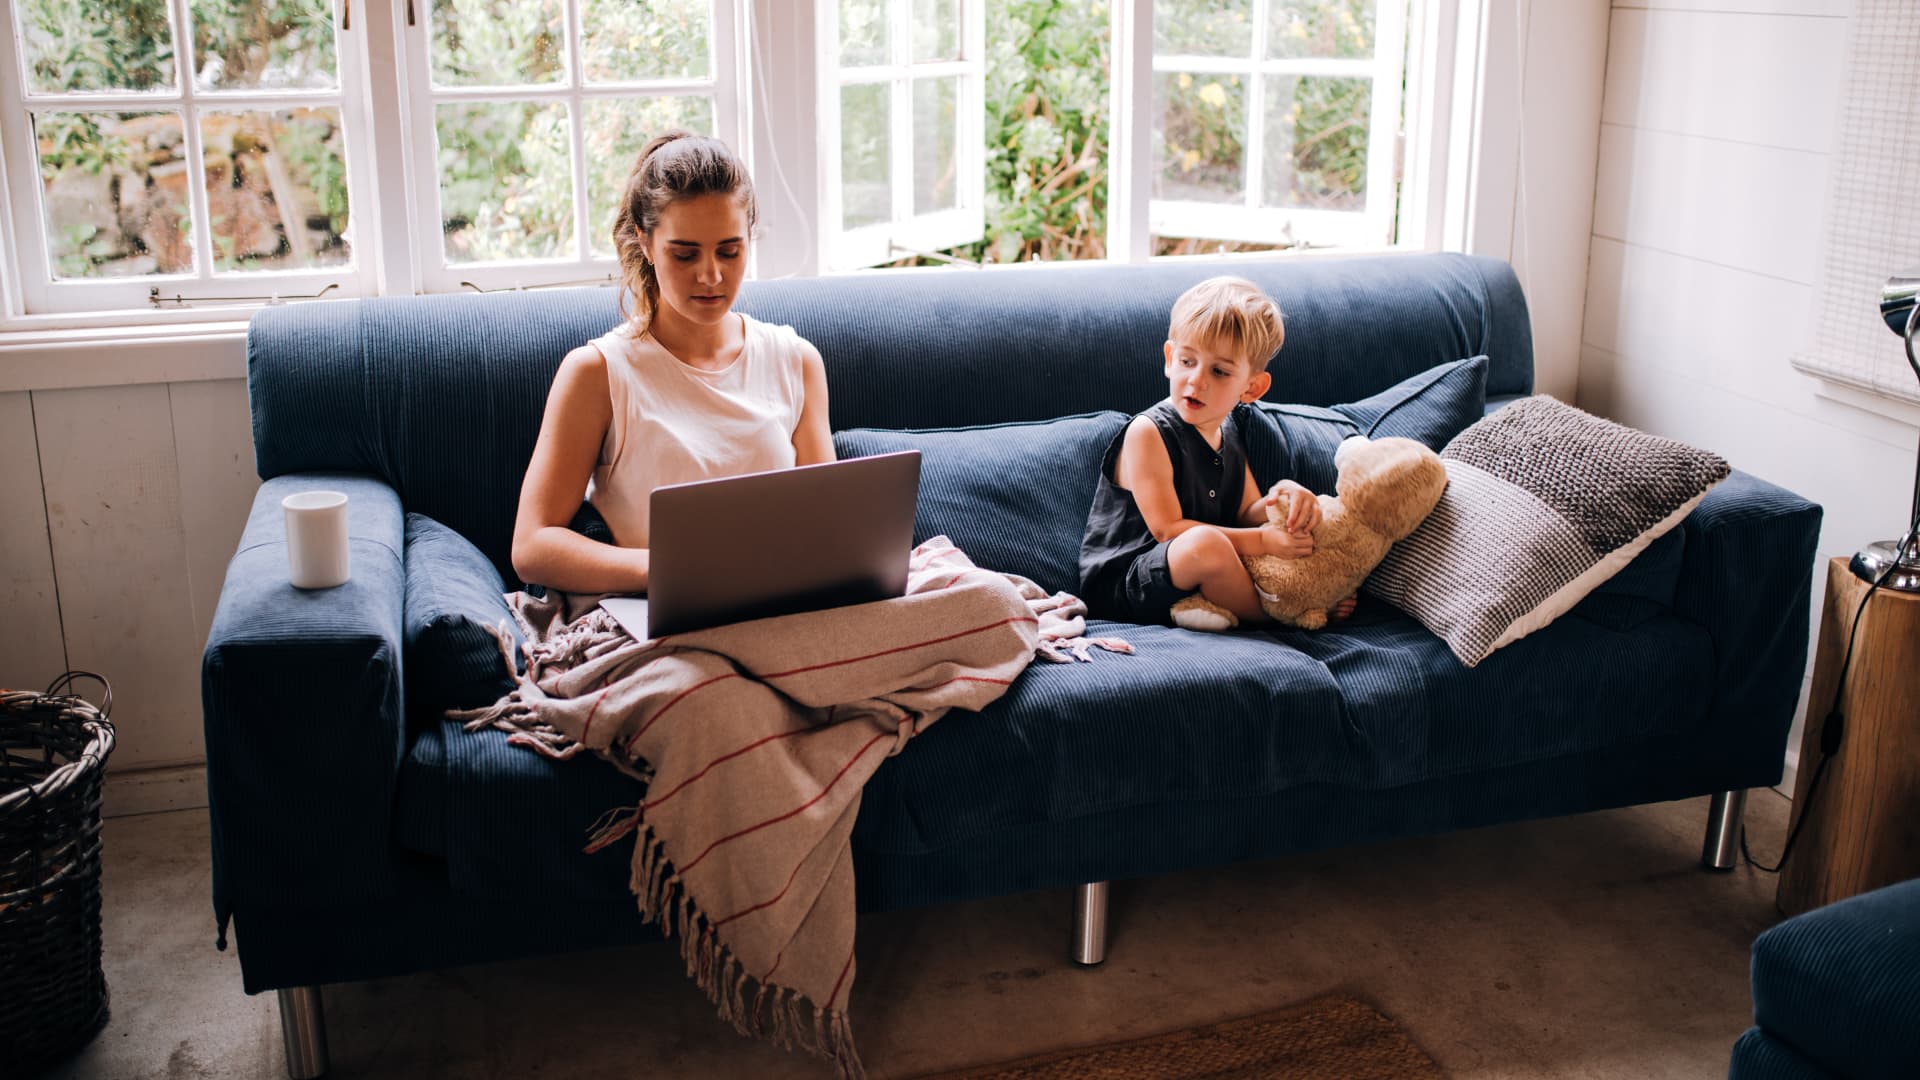 Working mom at home